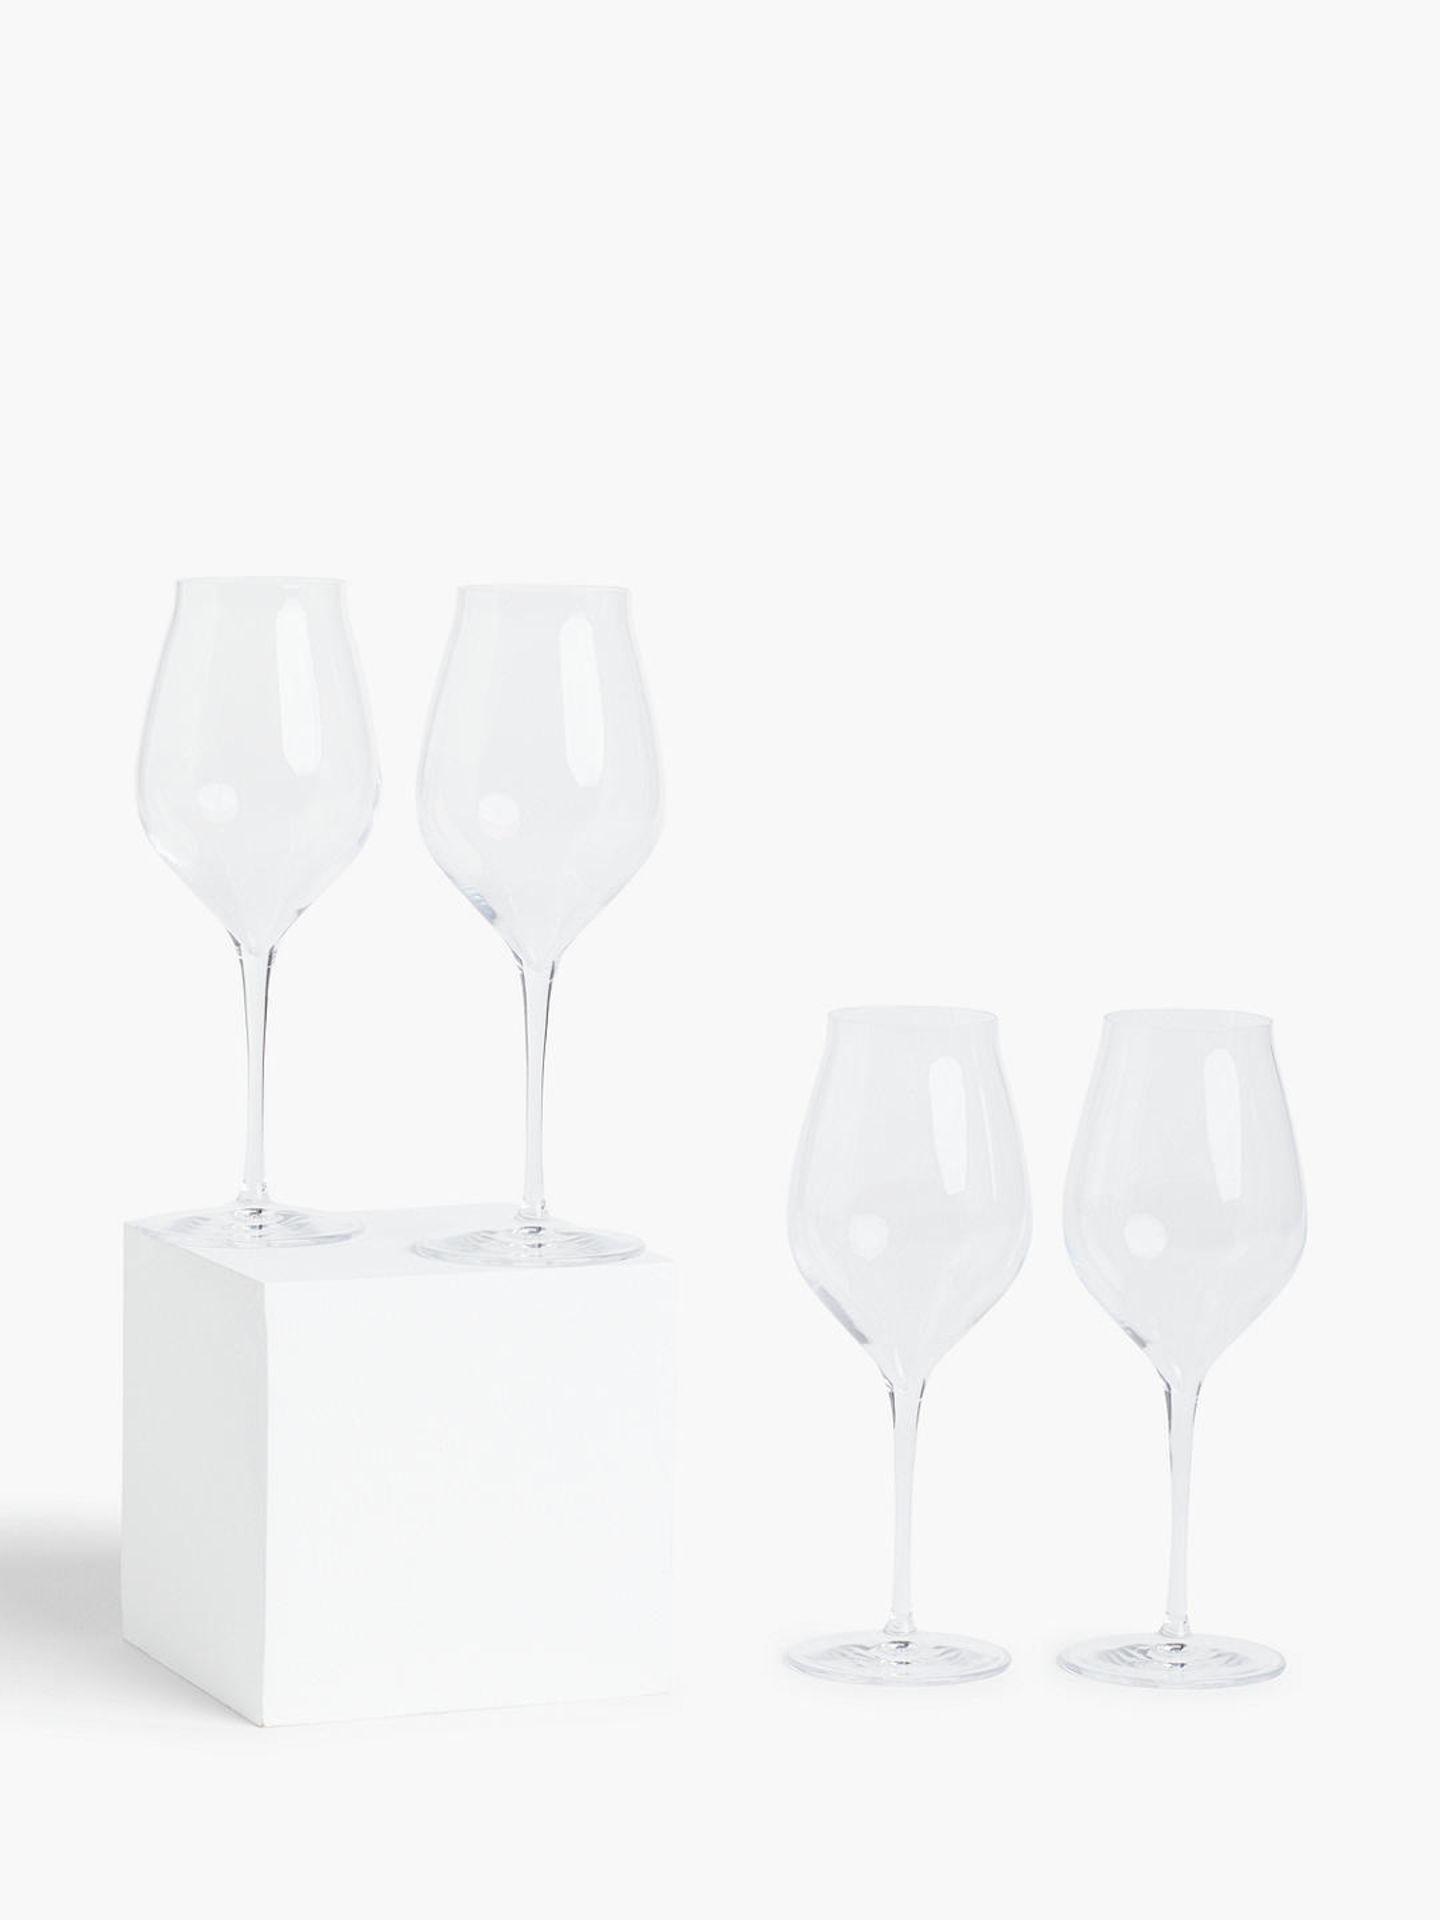 BRAND NEW BOX OF 4 LIGHTER BODIED WINE GLASSES - RRP £45. - Image 2 of 2